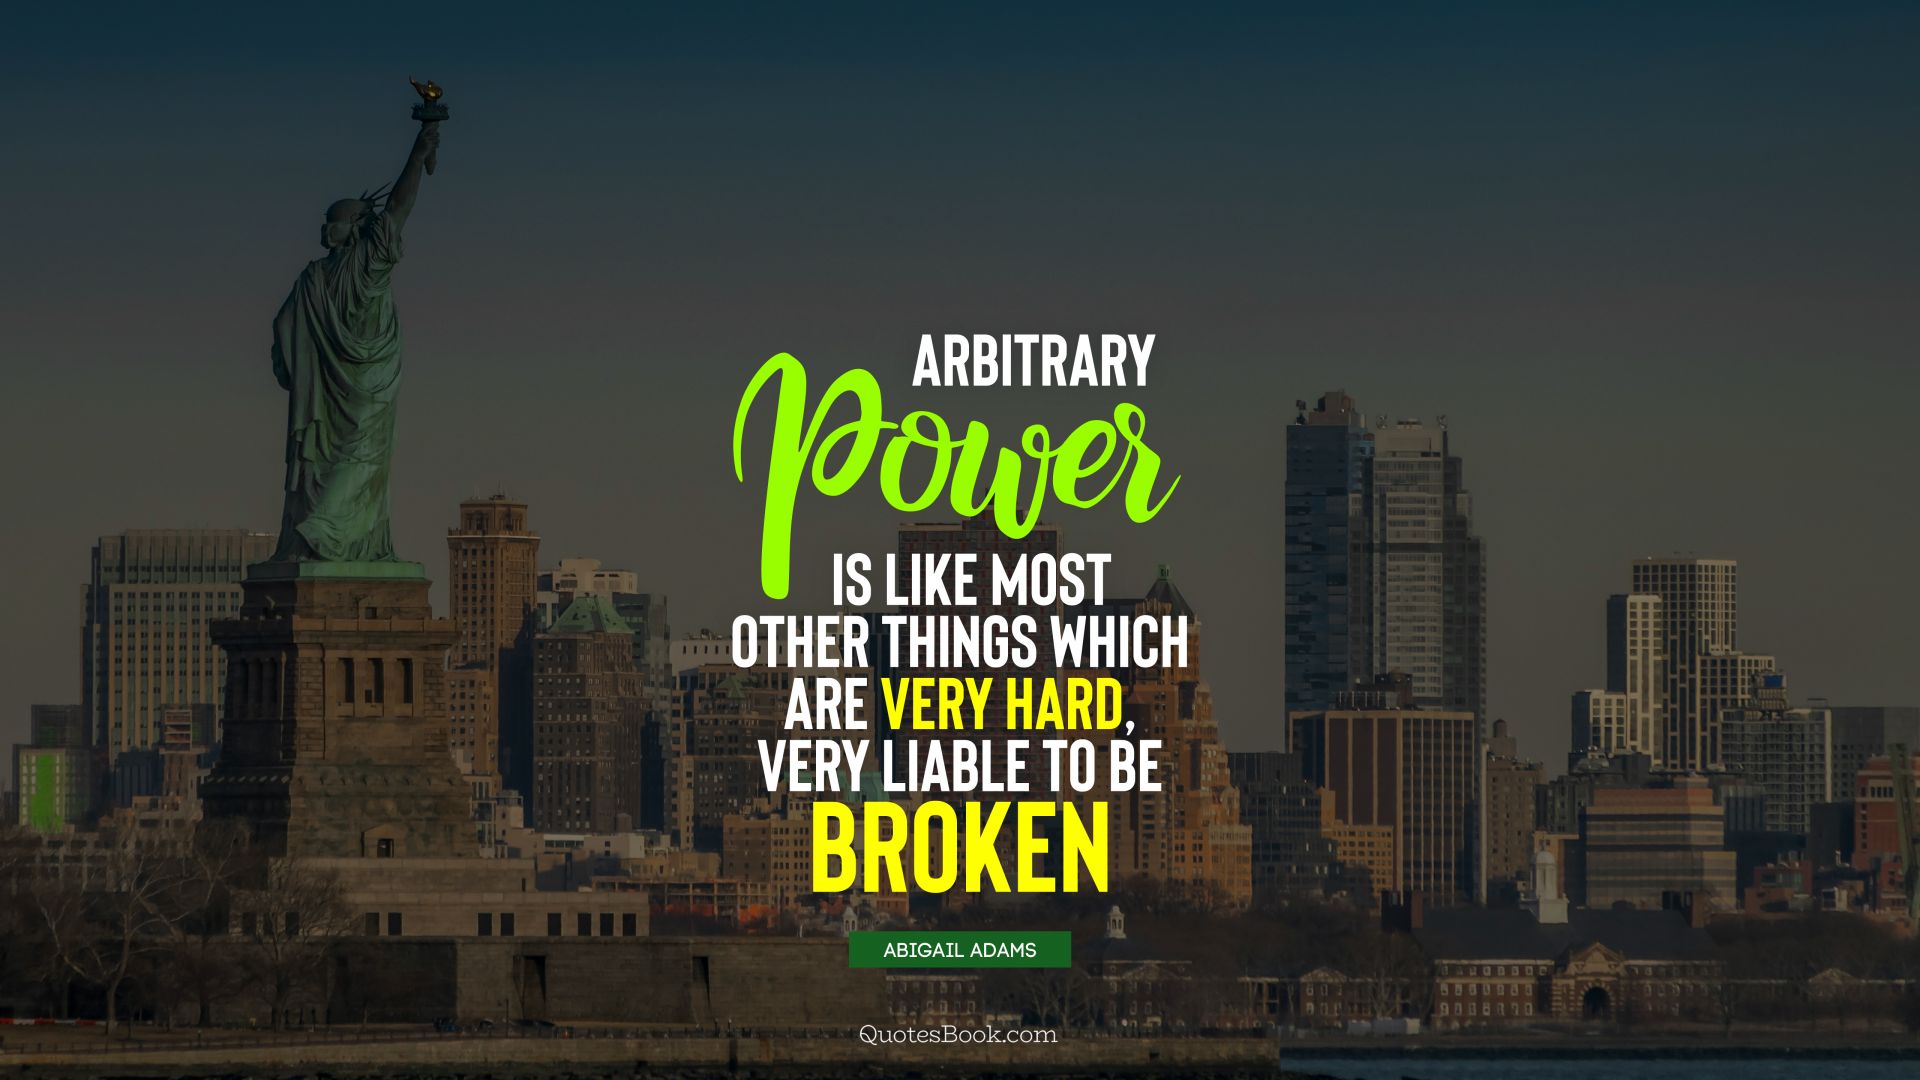 Arbitrary power is like most other things which are very hard, very liable to be broken. - Quote by Abigail Adams